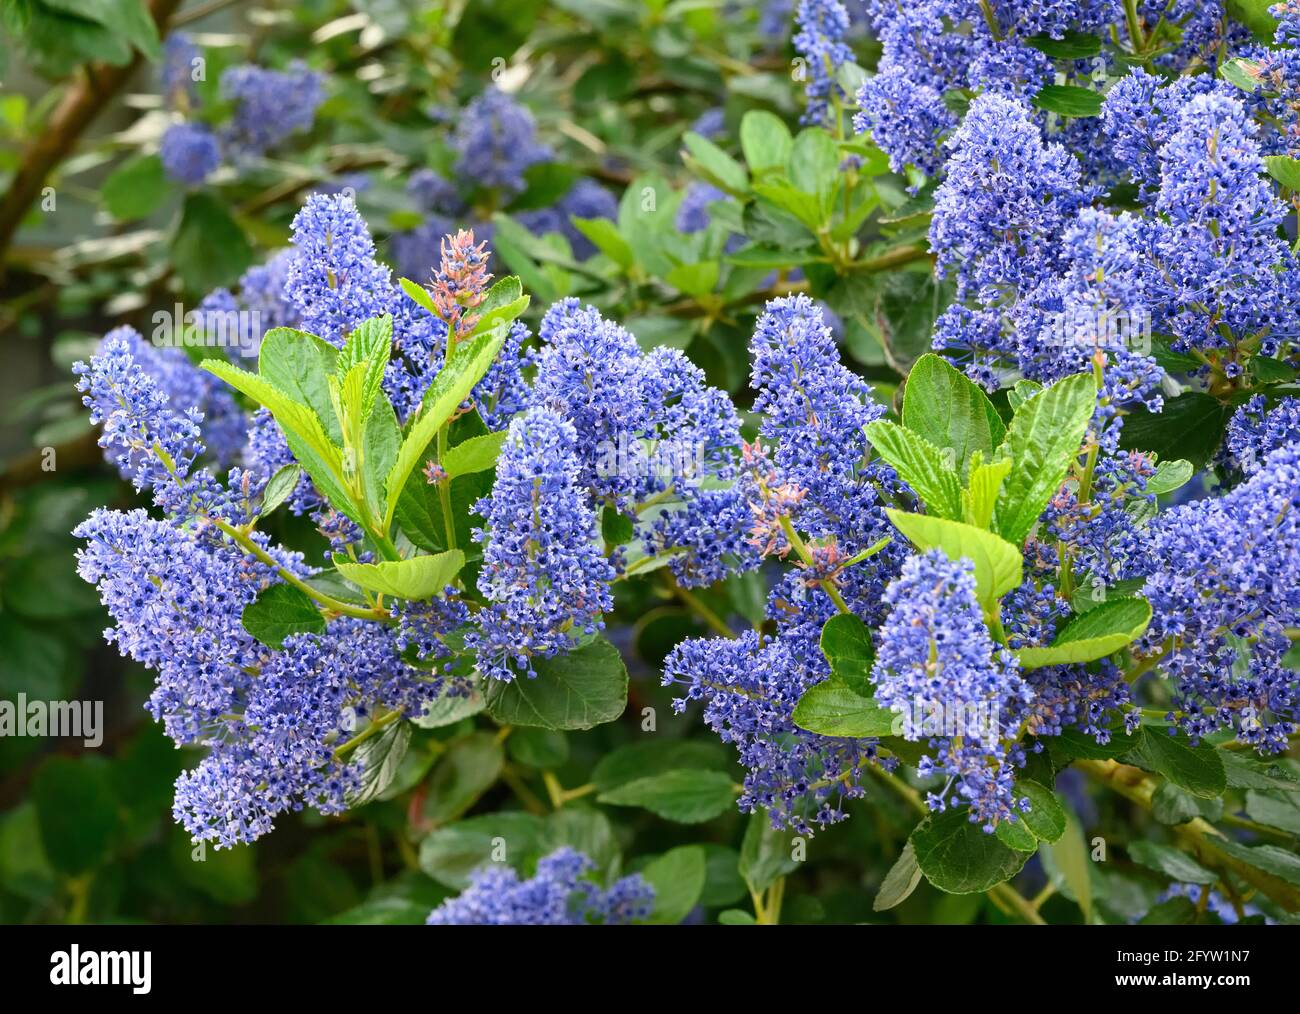 Close up of the beautiful blue flowers of an evergreen Ceanothus shrub (also known as a Californian Lilac) Stock Photo